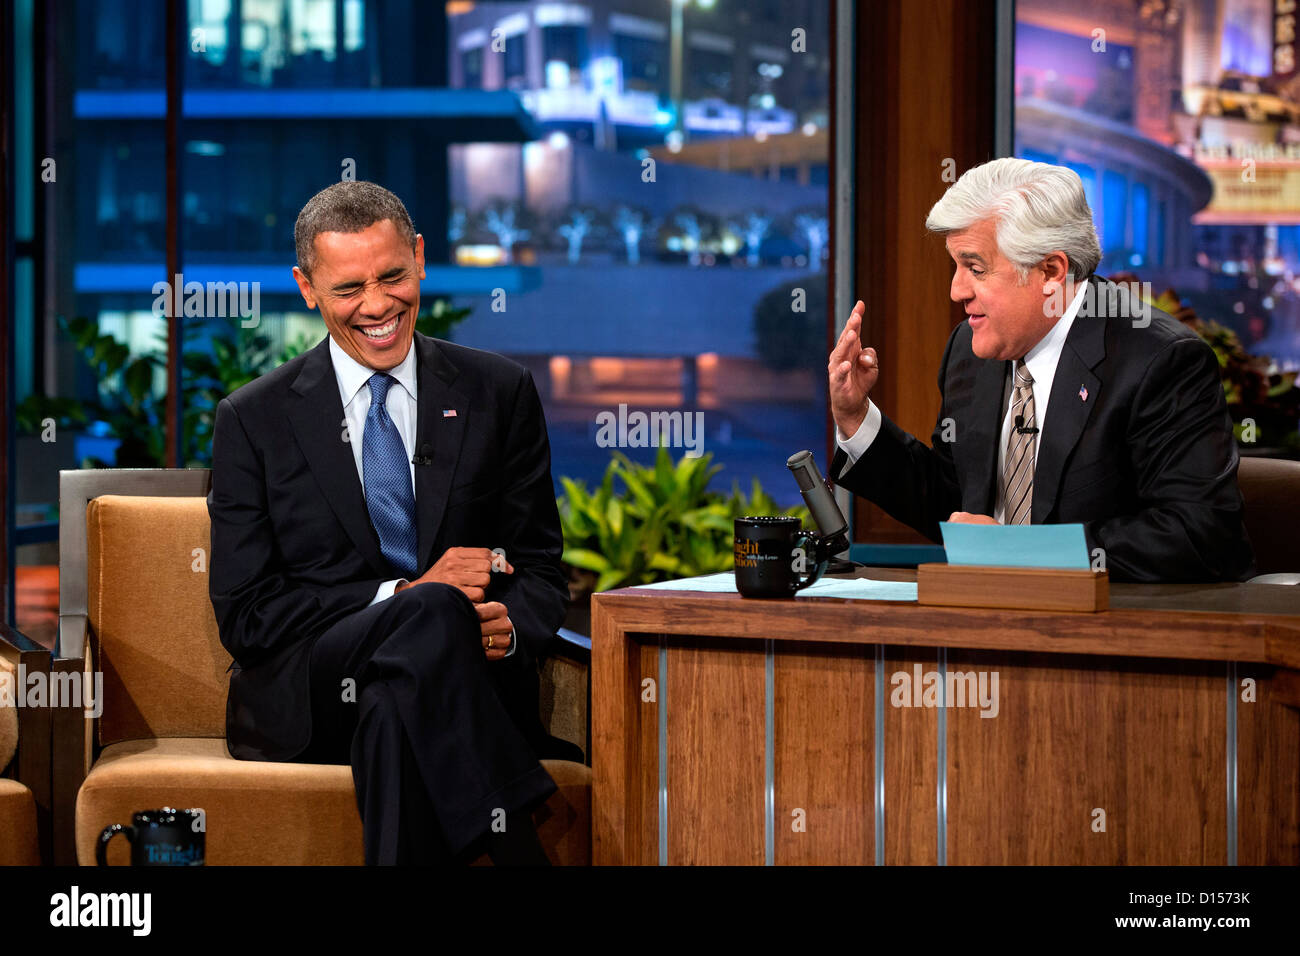 US President Barack Obama participates in an interview with Jay Leno during a taping of The Tonight Show with Jay Leno at the NBC Studios October 24, 2012 in Burbank, CA. Stock Photo